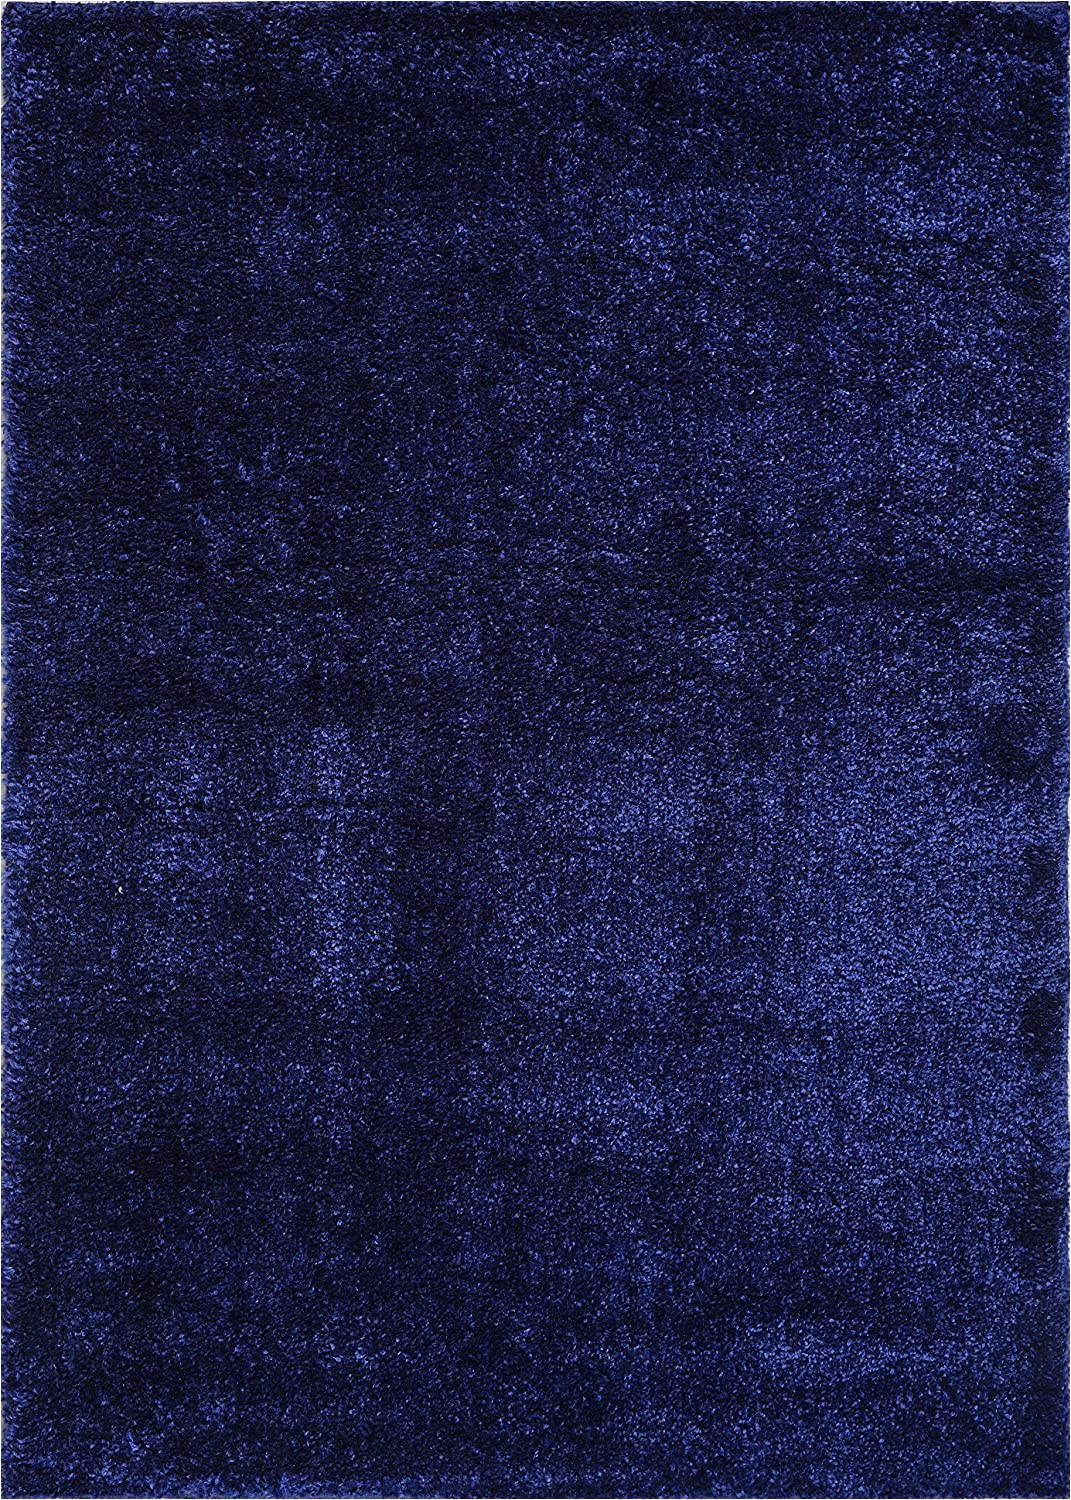 Plush Blue area Rug Ladole Rugs Shaggy soft Plush Smooth solid Plain Color Modern Durable area Rug Carpet for Living Room Bedroom In Navy Blue 5 3" X 7 6" 160cm X 230cm